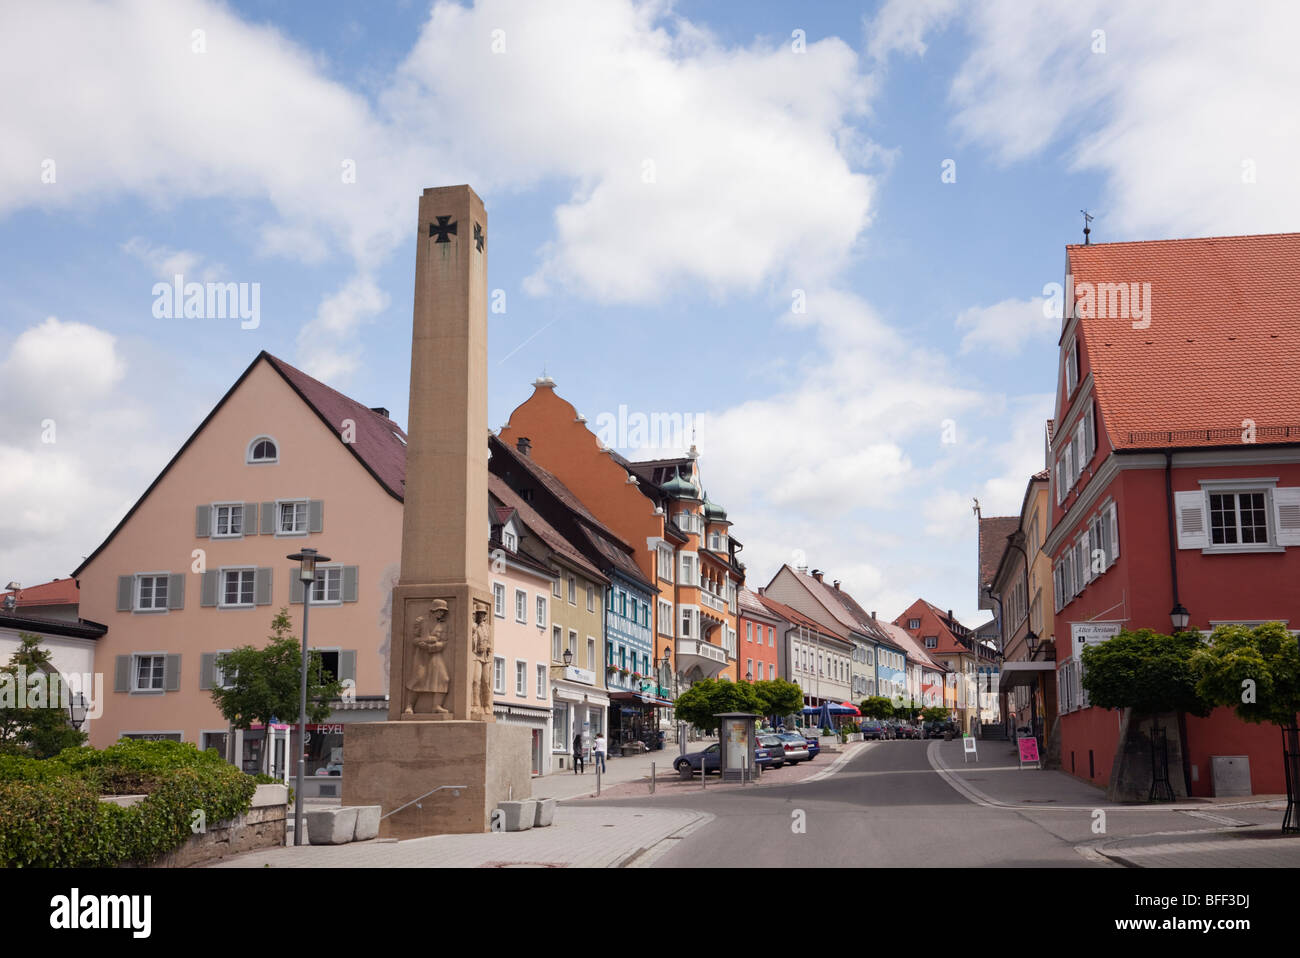 War memorial and old buildings on main street in historic small town of Stockach, Baden Wurttenburg, Germany, Europe. Stock Photo